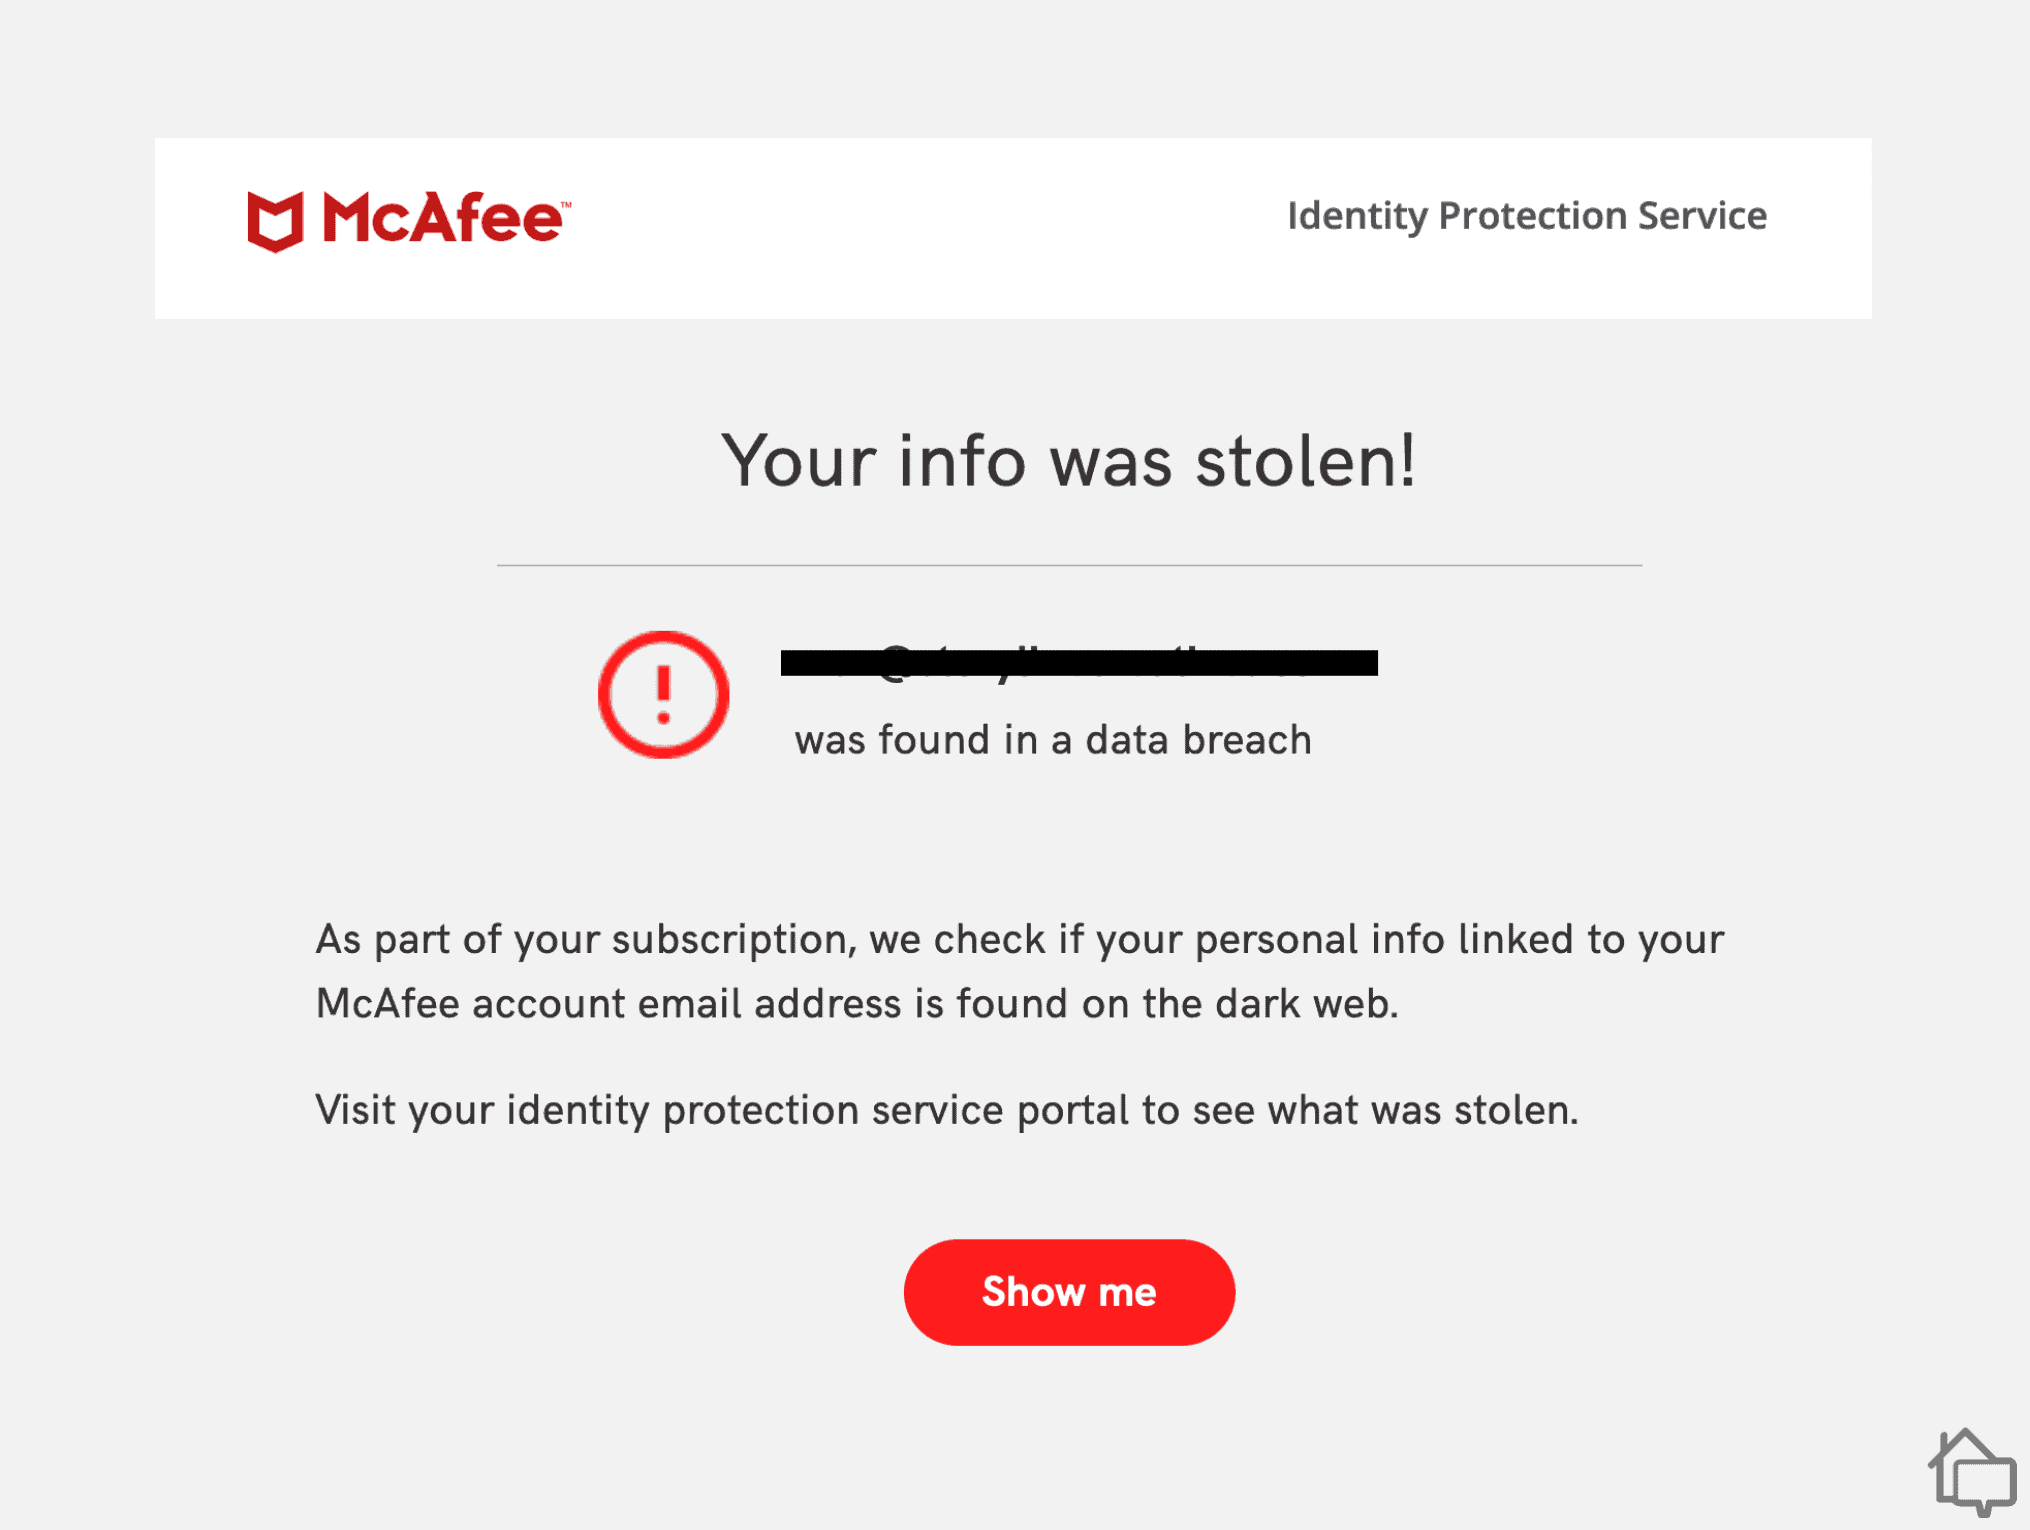 McAfee snagged two email address breaches right out the gate.